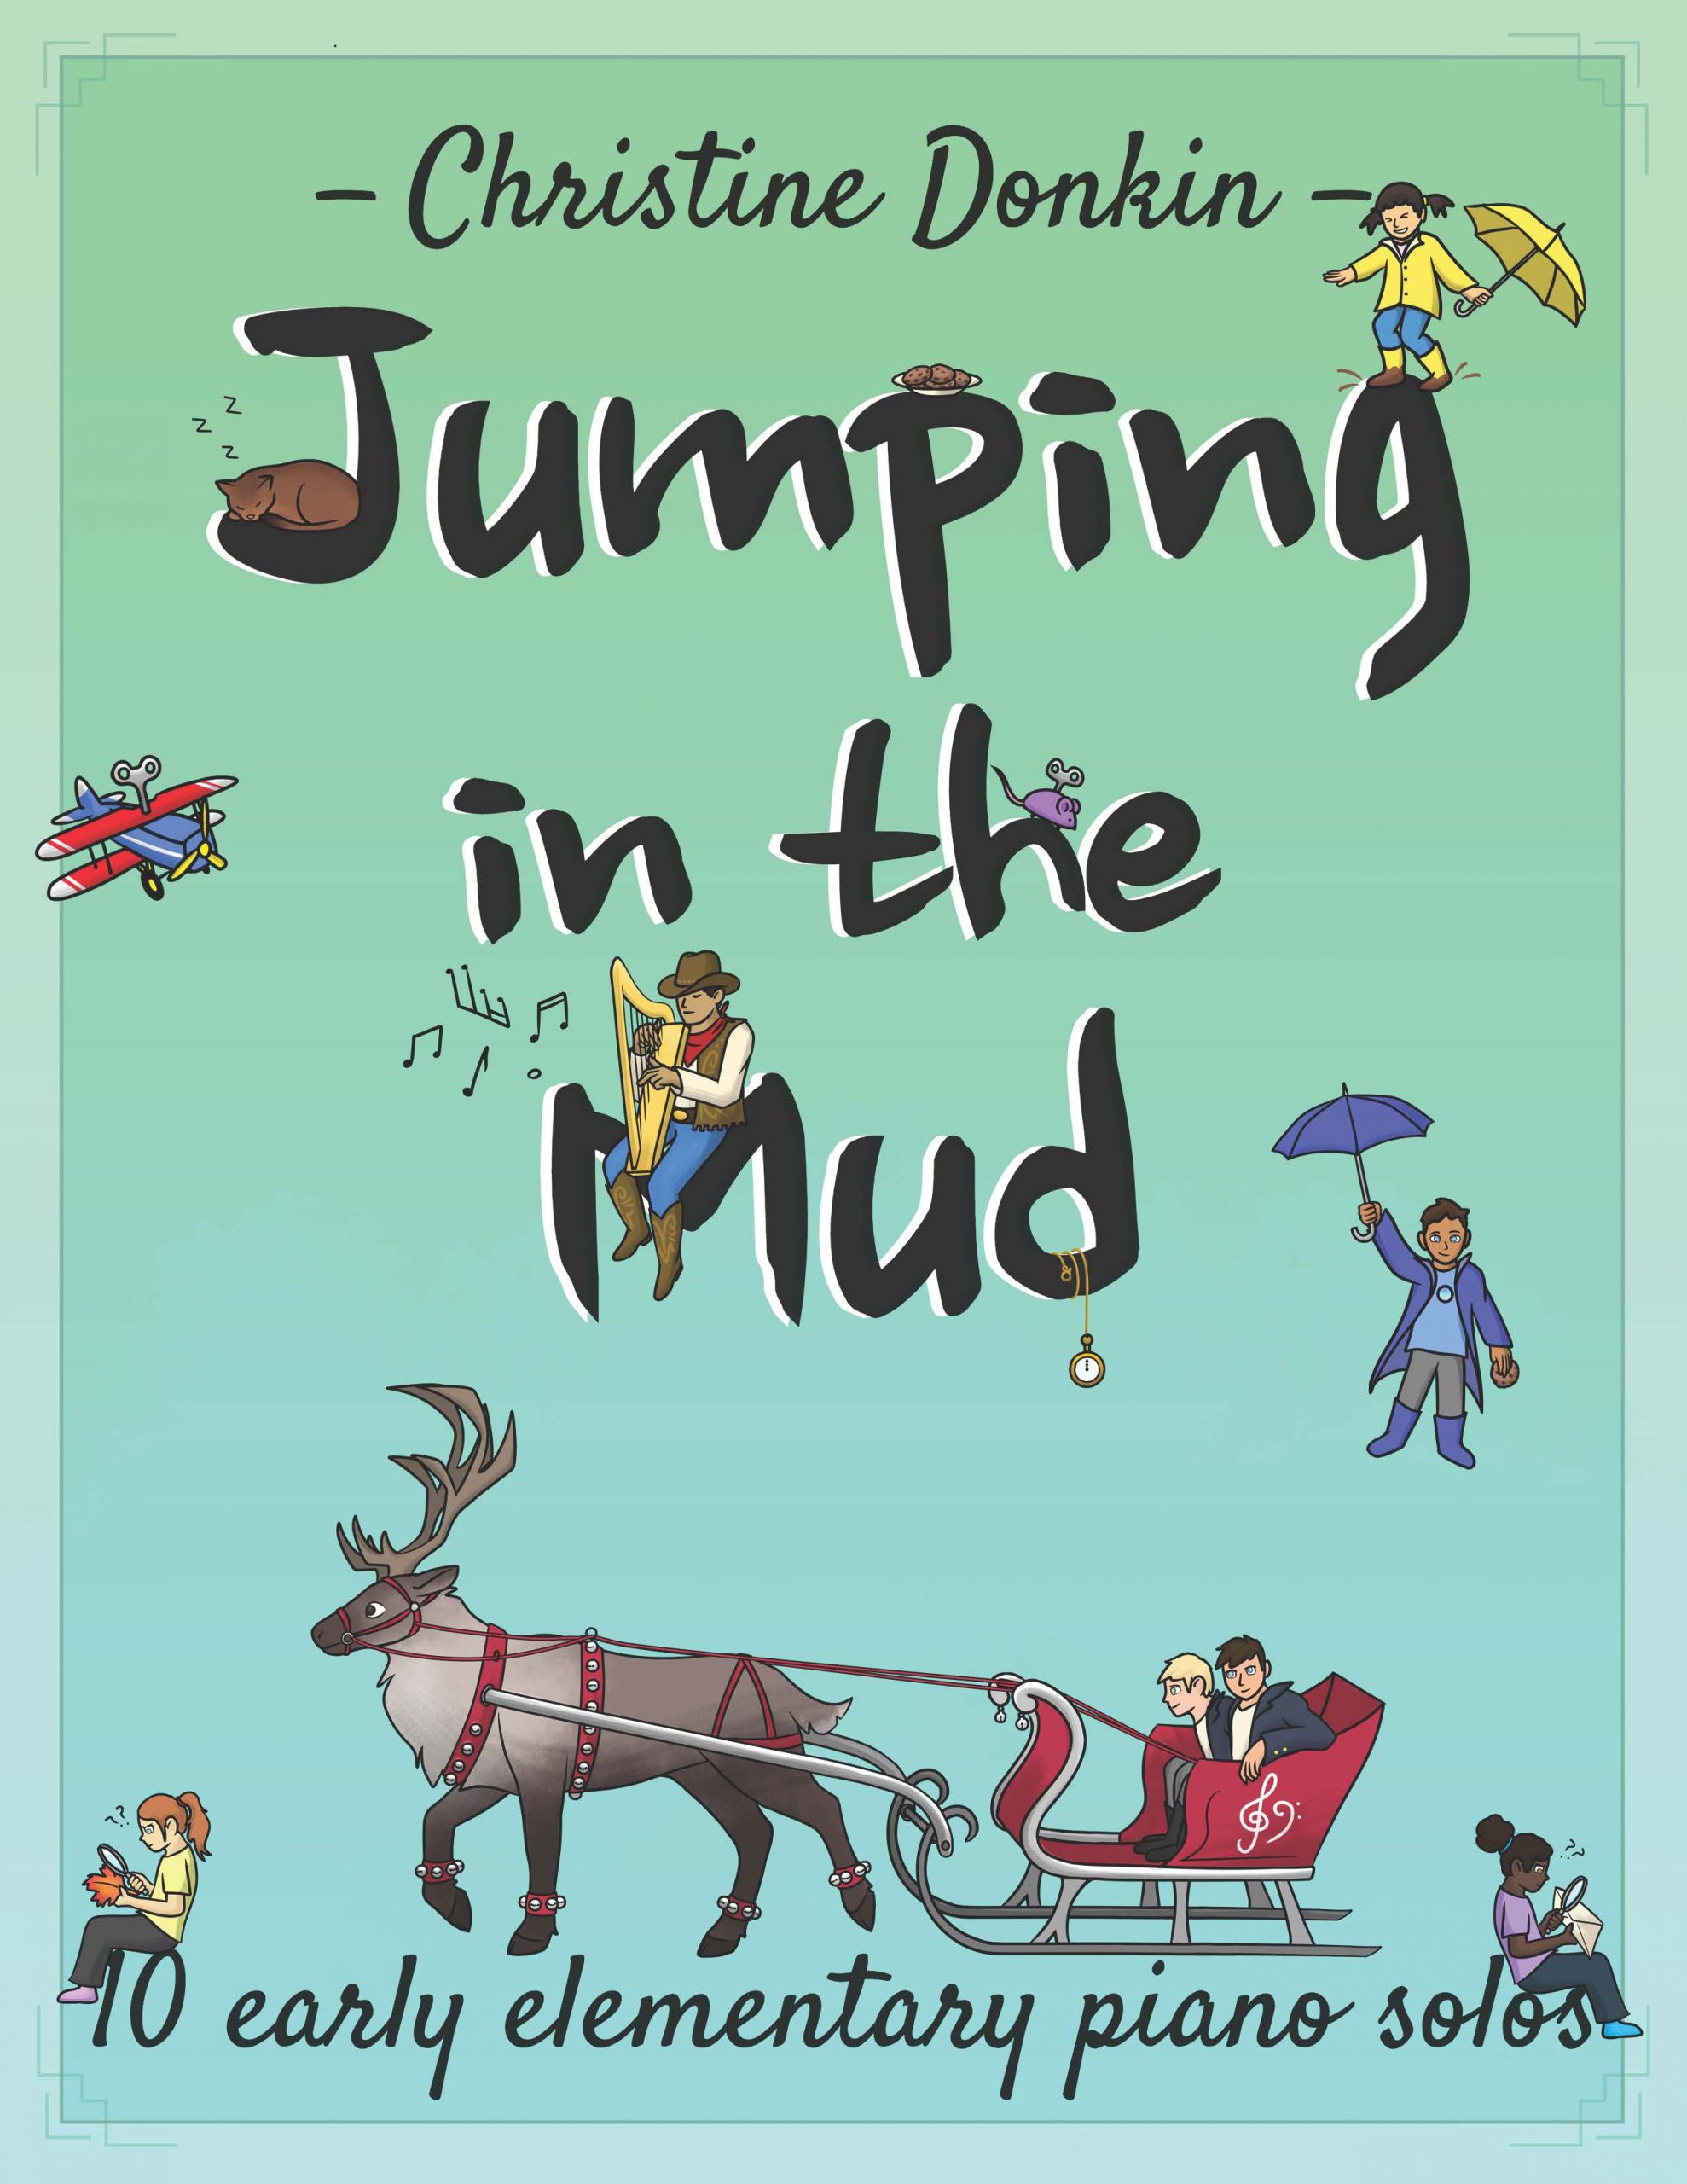 Book cover of "Jumping in the Mud: 10 early elementary piano solos" by Christine Donkin